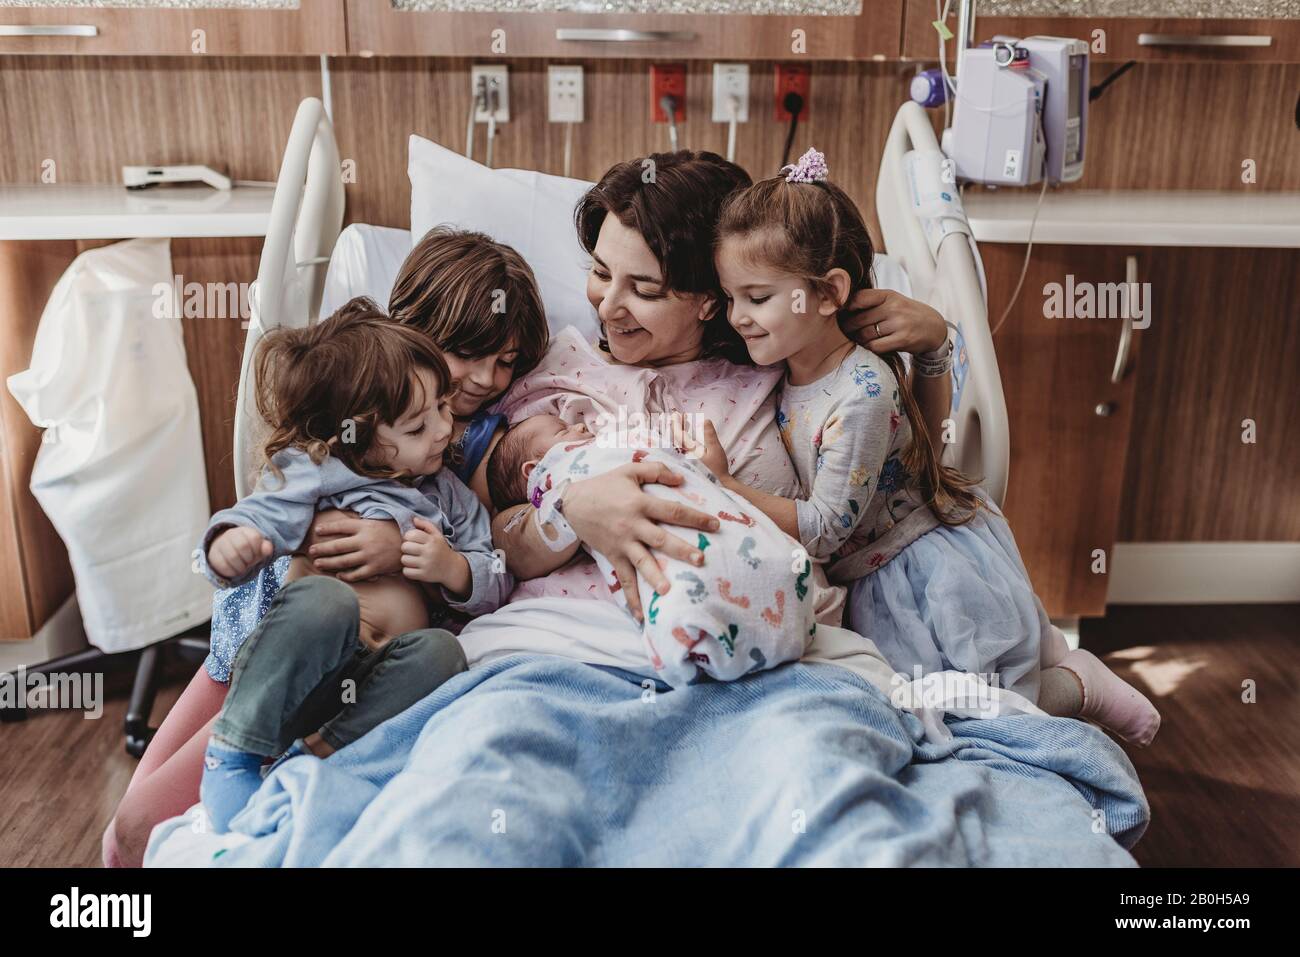 Mid view of mom and children holding newborn son Stock Photo